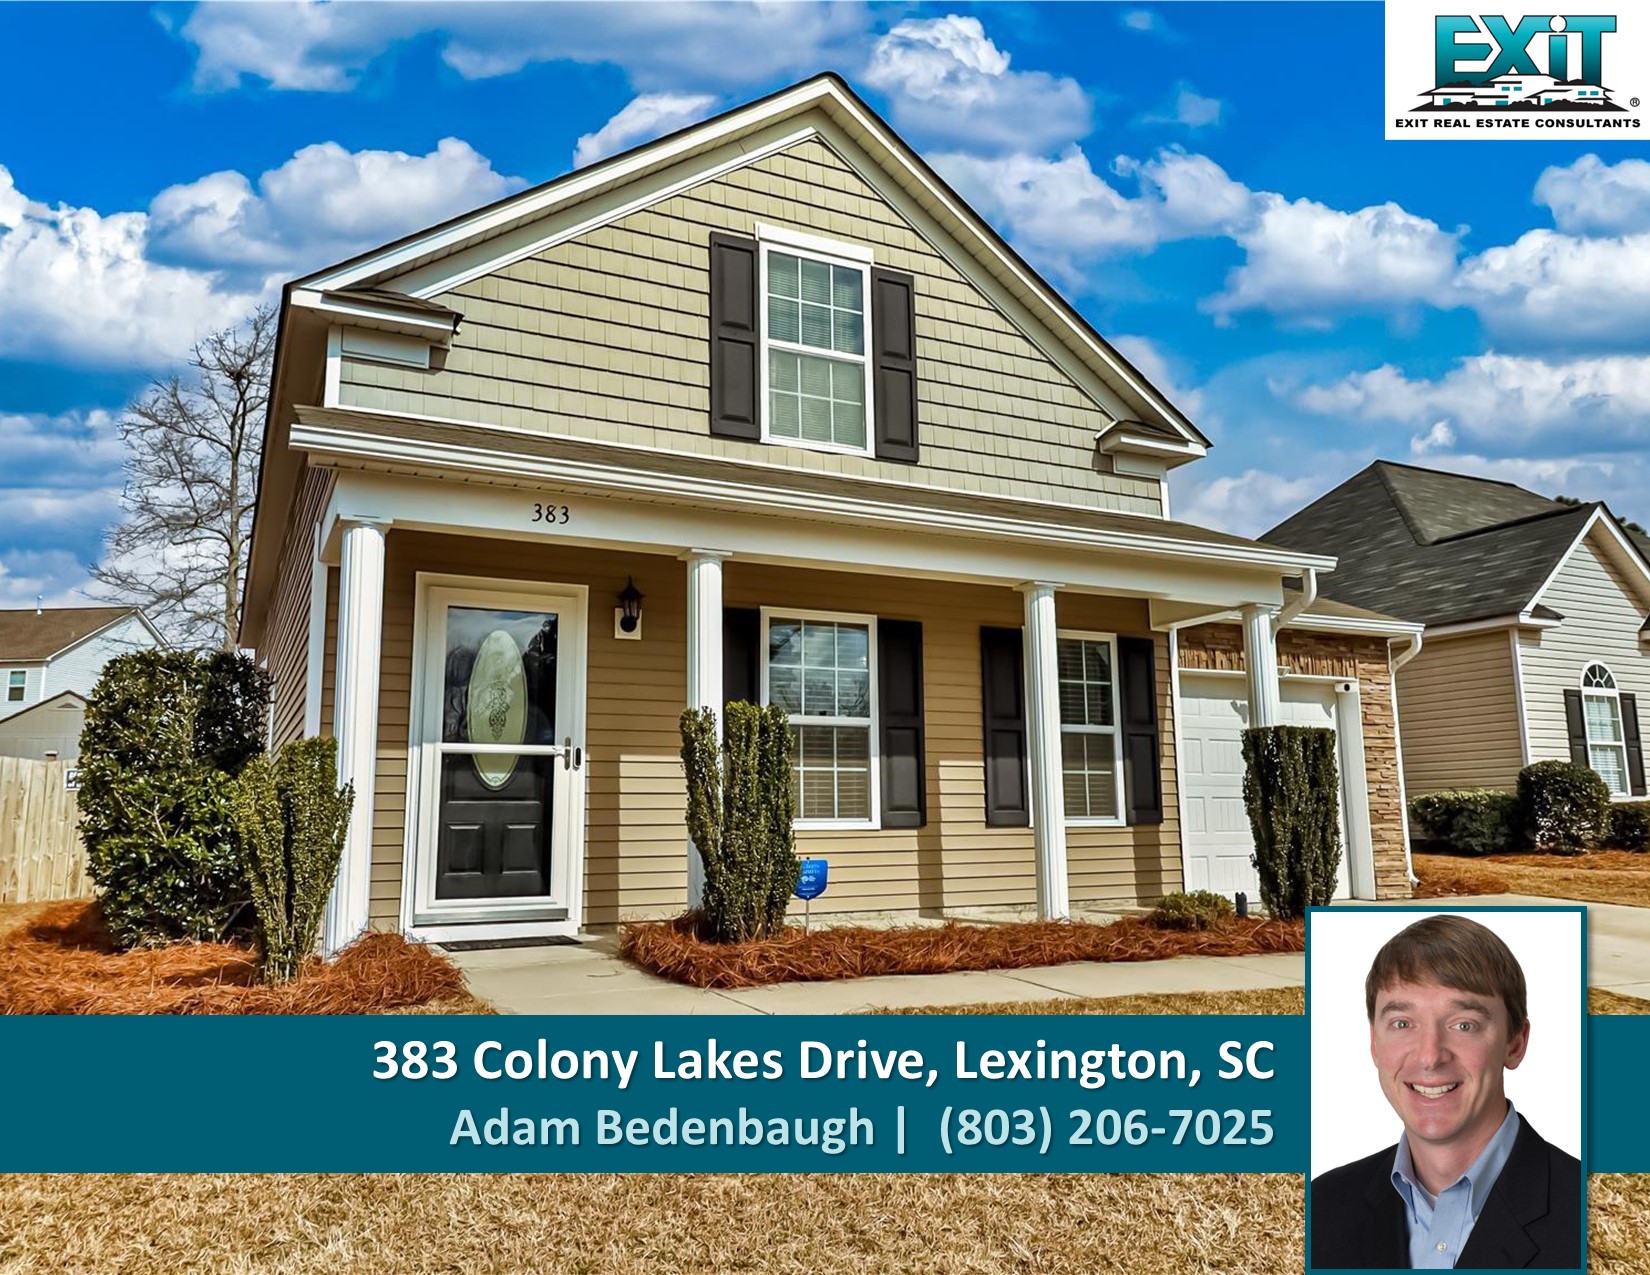 Just listed in Colony Lakes